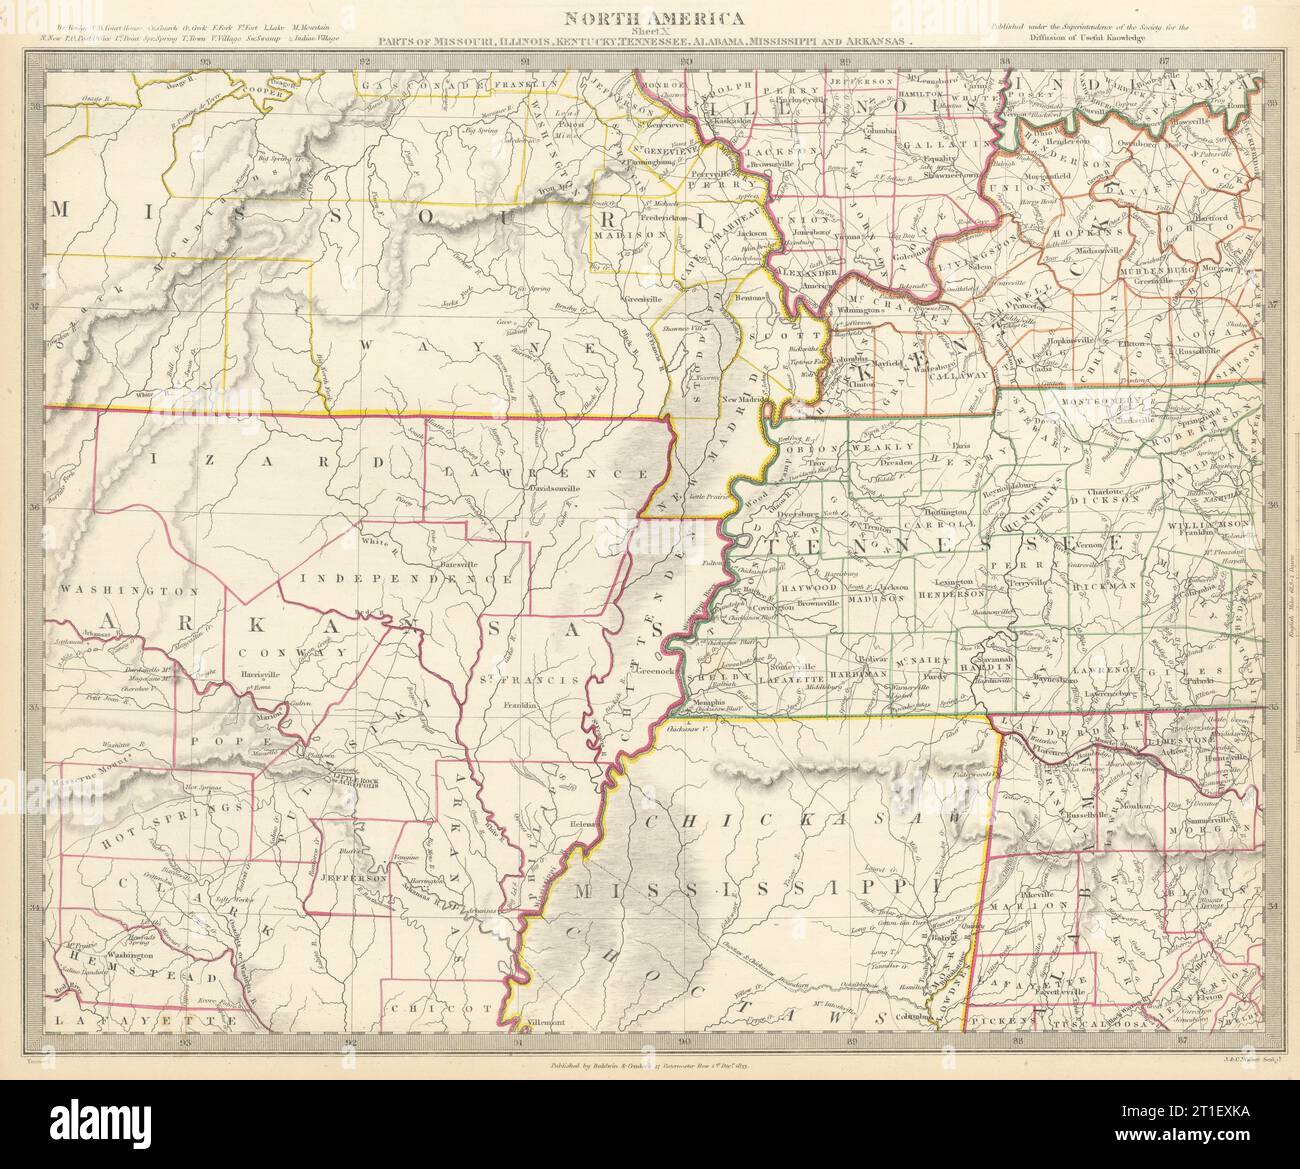 USA. AR MO TN MS IL IN KY AL. Choctaw Chickasaw boundaries. SDUK 1844 old map Stock Photo